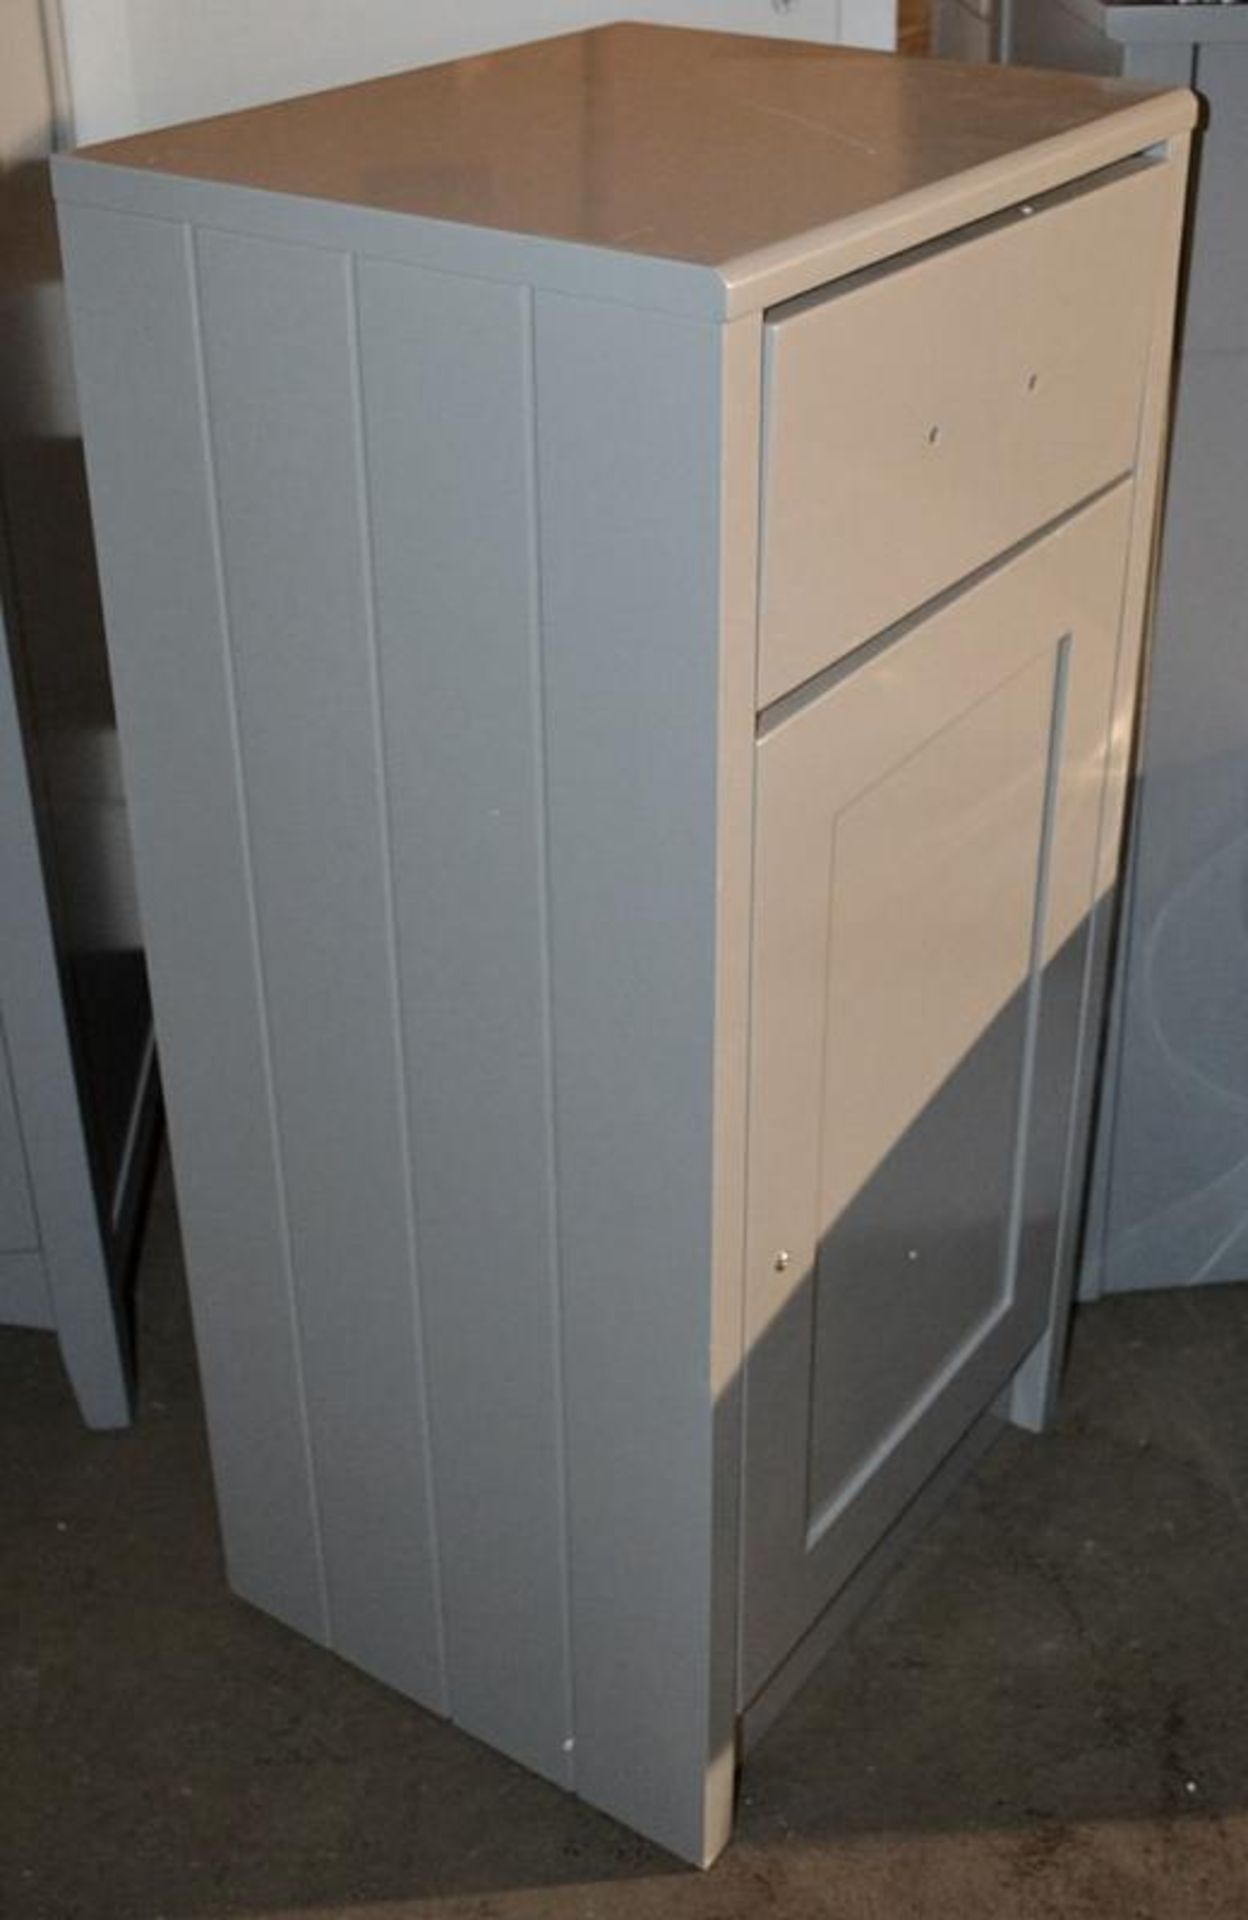 1 x Camberley 1-Door Unit With False Drawer In Grey - Dimensions: - Ex-Display Item - Ref MT862 -